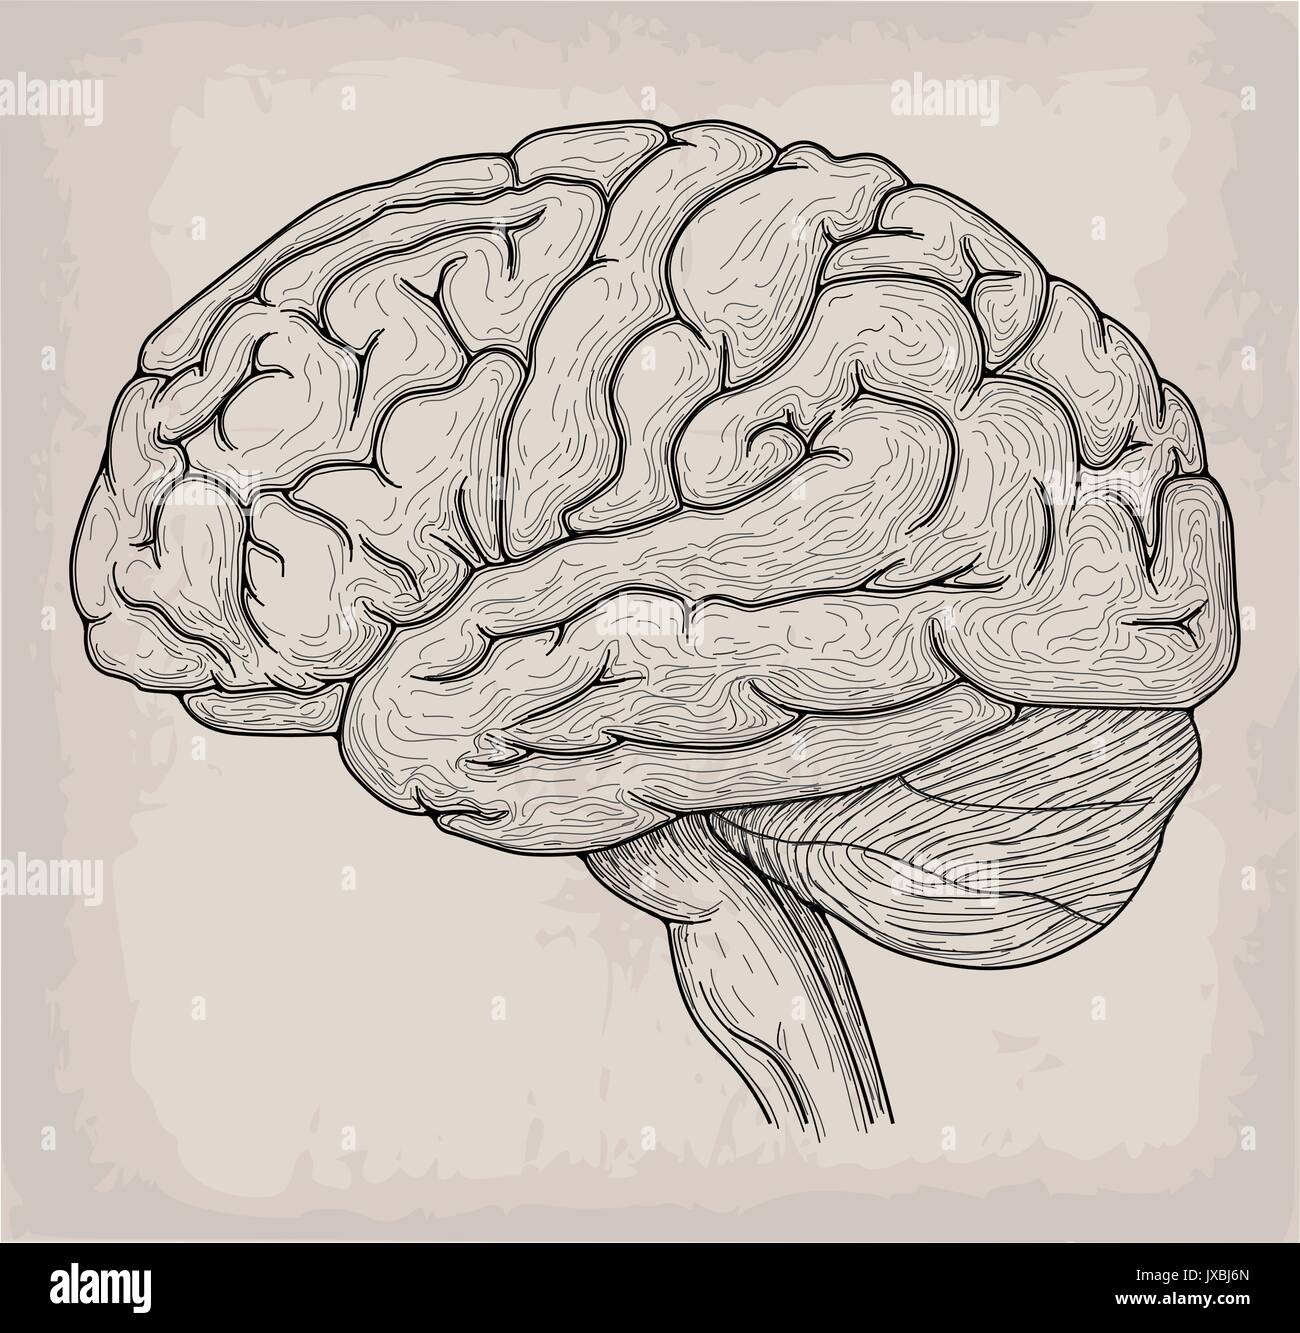 Details more than 80 brain picture drawing best